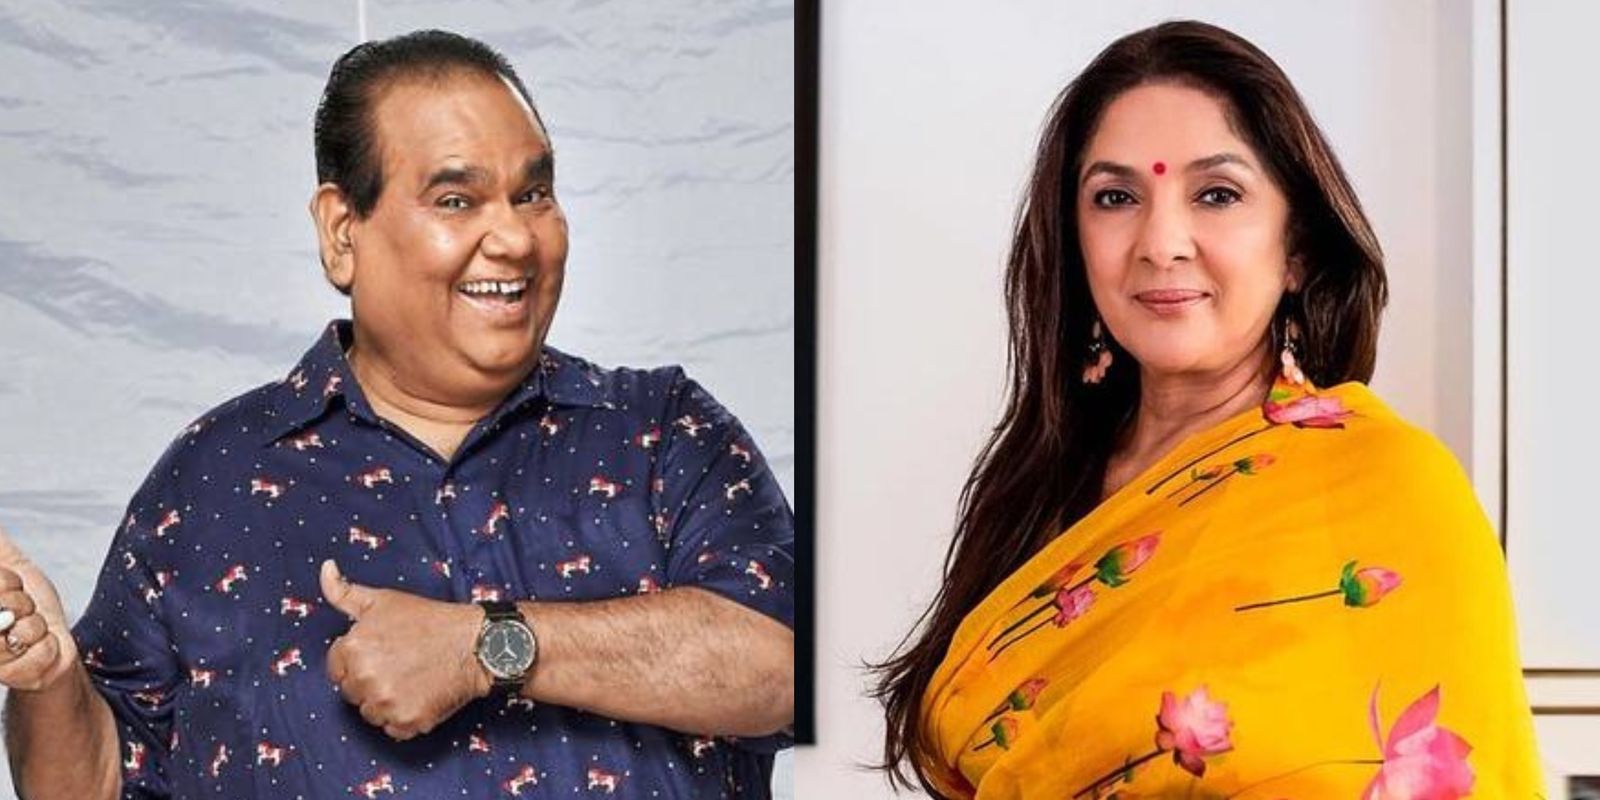 Satish Kaushik on asking Neena Gupta to marry him: ‘I was concerned about not letting her feel alone’